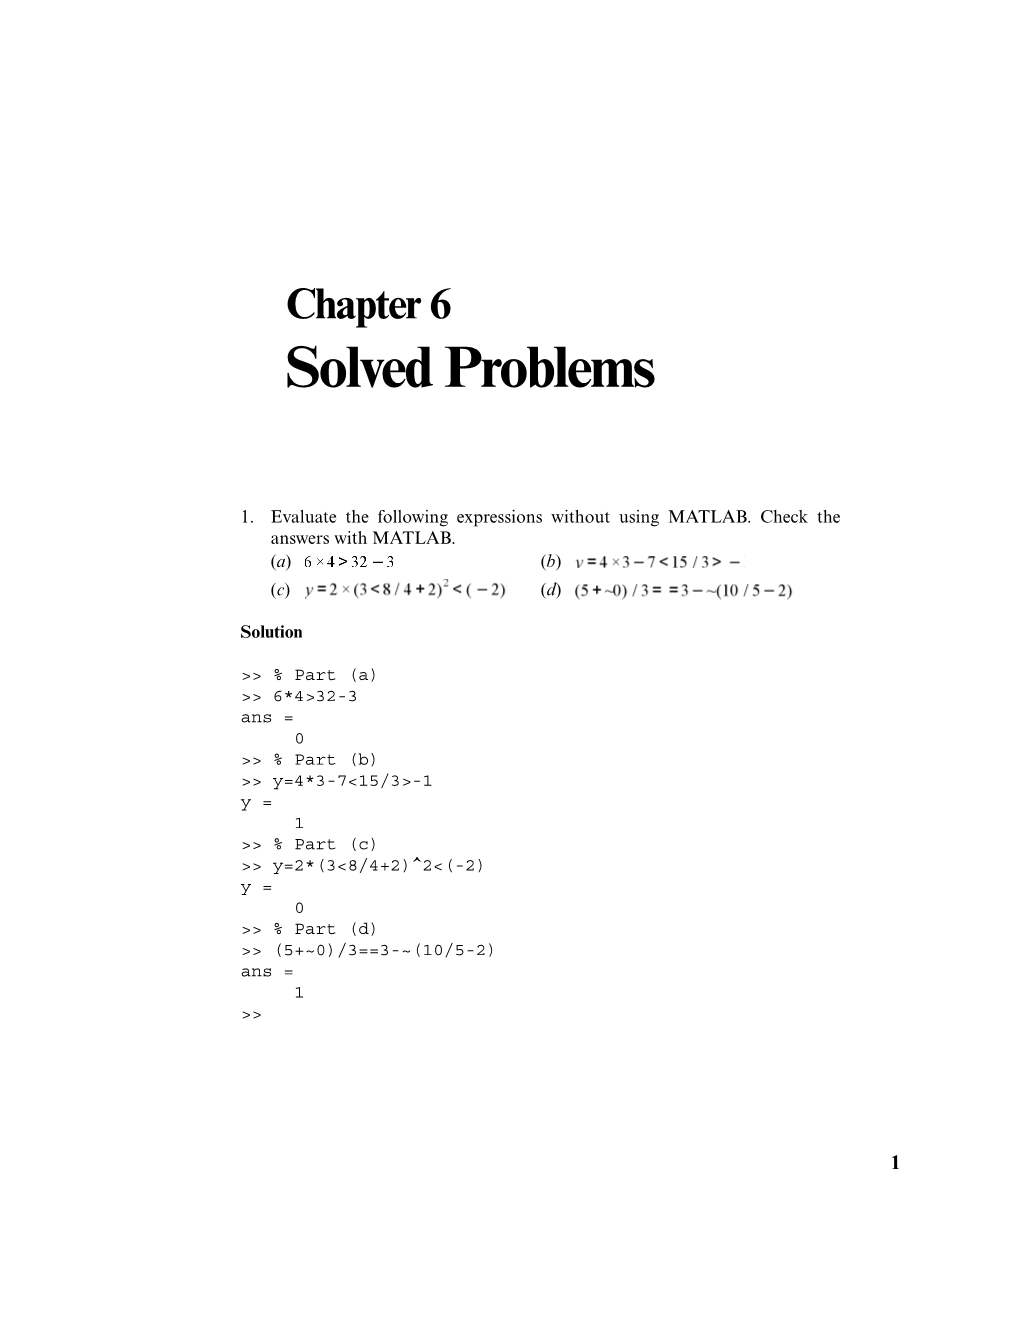 Chapter 6 Solved Problems